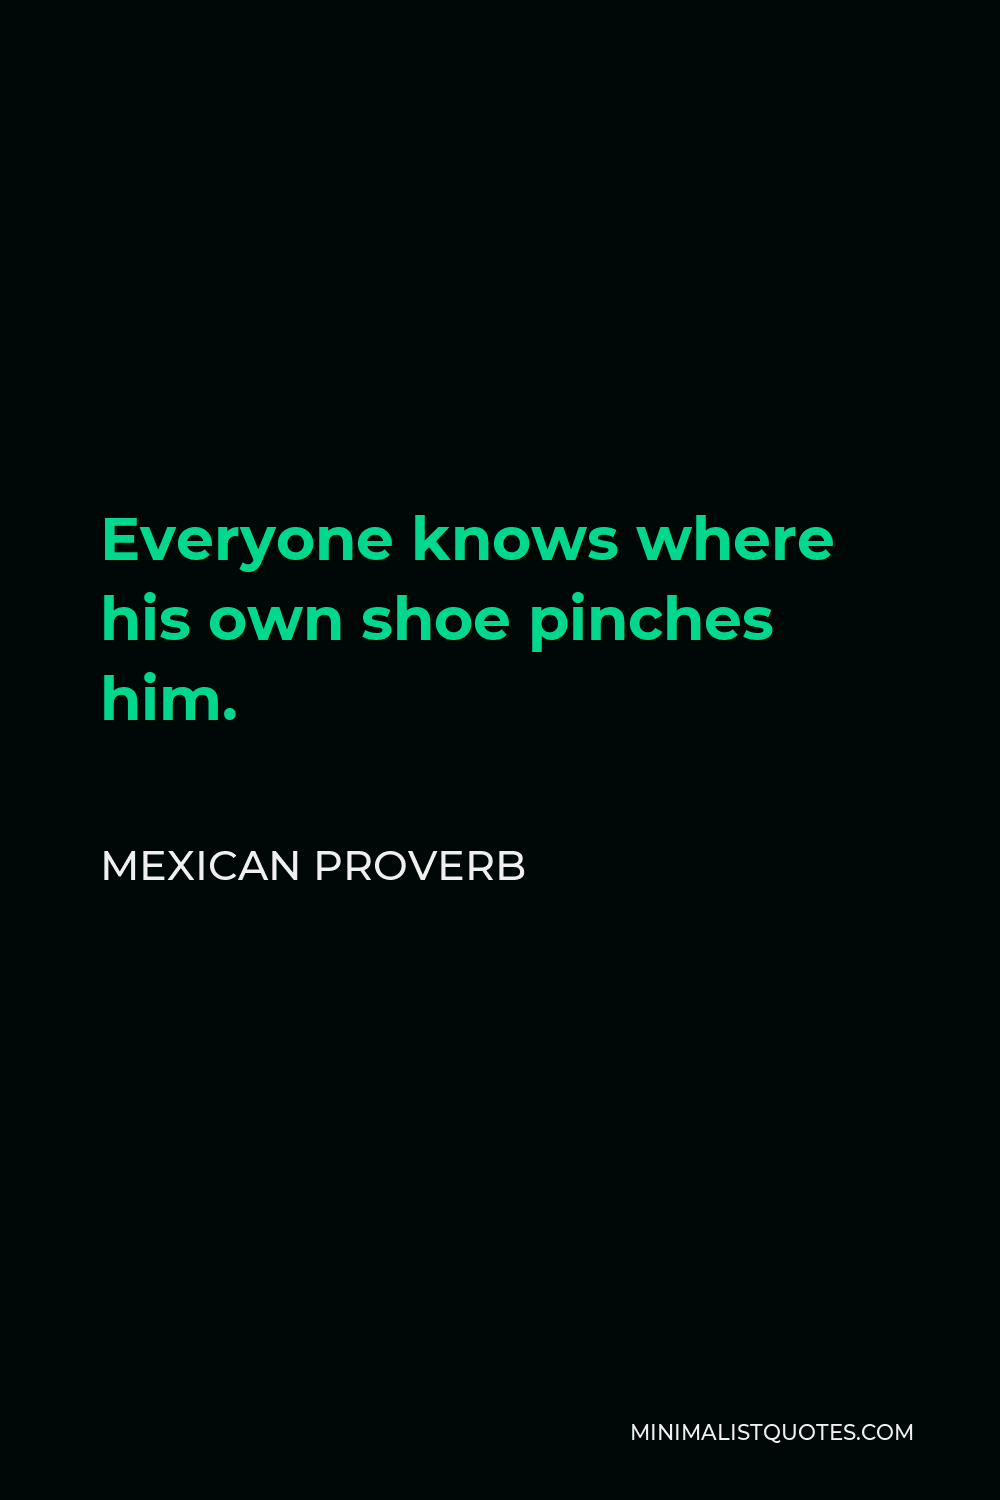 Mexican Proverb Quote - Everyone knows where his own shoe pinches him.